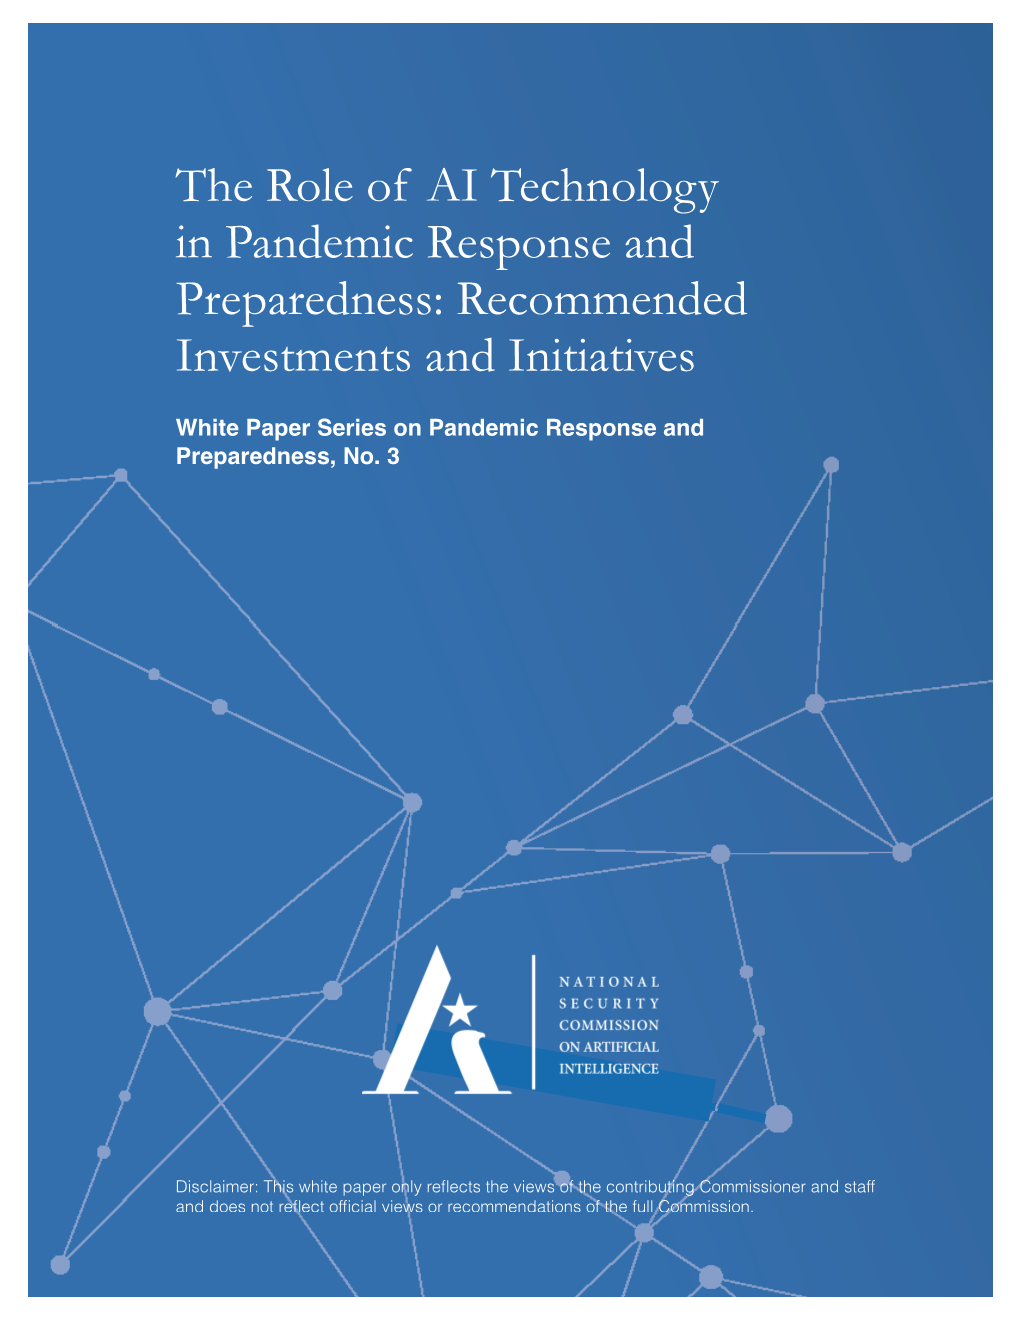 The Role of AI Technology in Pandemic Response and Preparedness: Recommended Investments and Initiatives